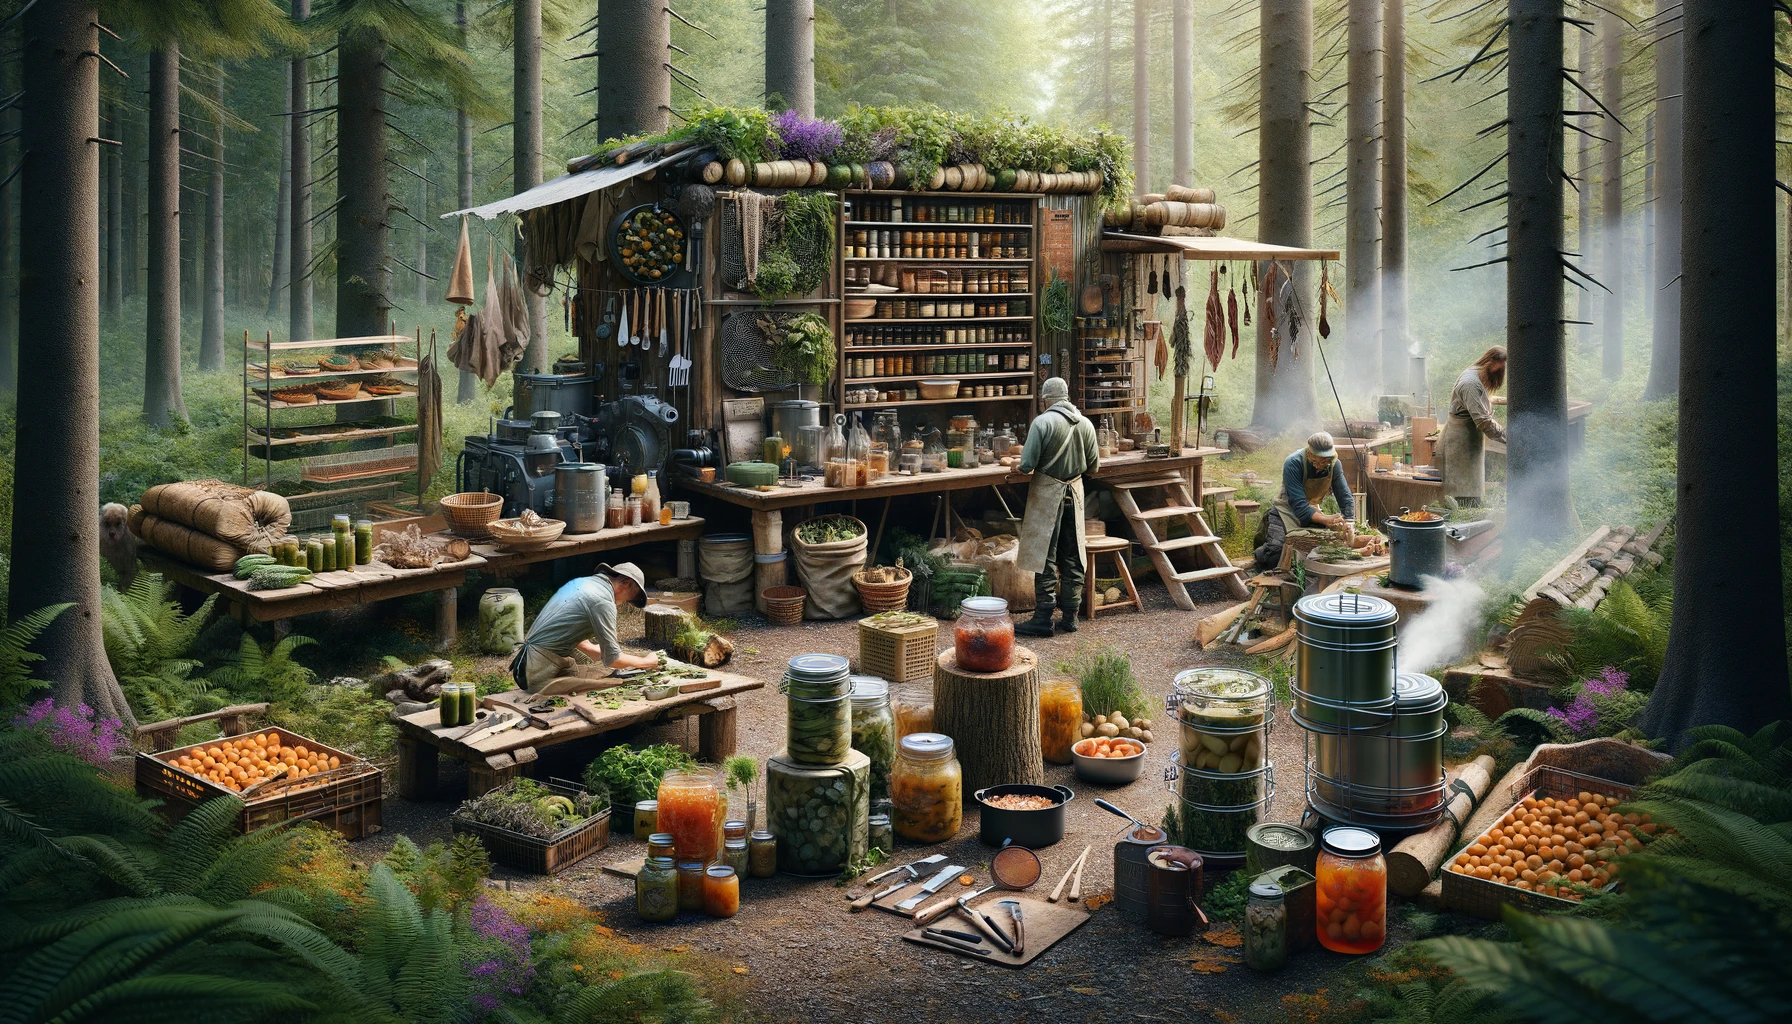 Outdoor makeshift kitchen scene in a forest clearing, where preppers are preparing and preserving foraged finds, showcasing activities like cleaning, chopping, drying, canning, and vacuum-sealing, with a wood-fired stove and solar dehydrators, embodying self-sufficiency and sustainability